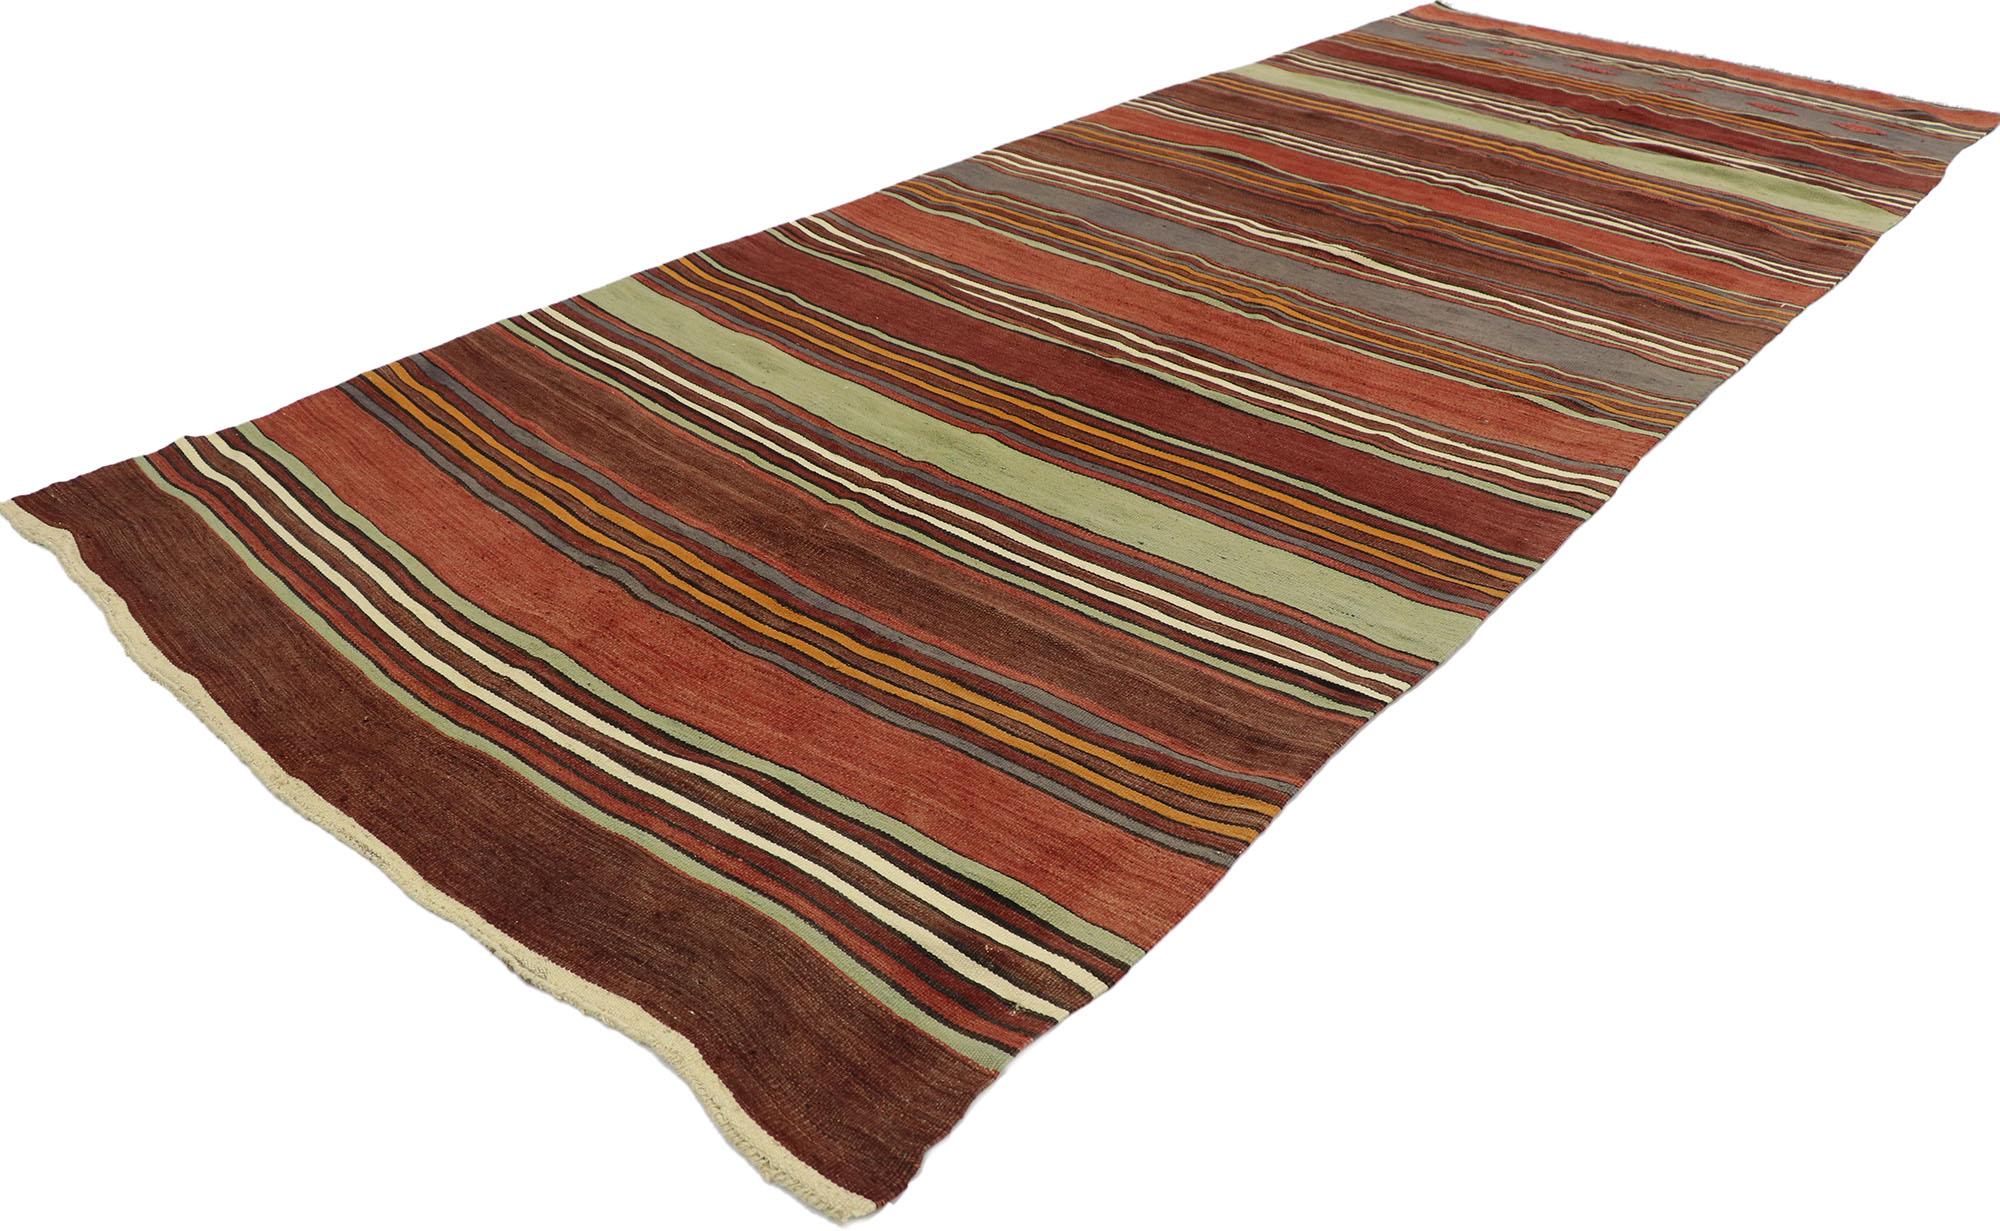 53135, vintage Turkish striped Kilim rug with modern cabin style. With its warm hues and rugged beauty, this handwoven wool striped kilim rug manages to meld contemporary, modern, and traditional design elements. The flat-weave kilim rug features a